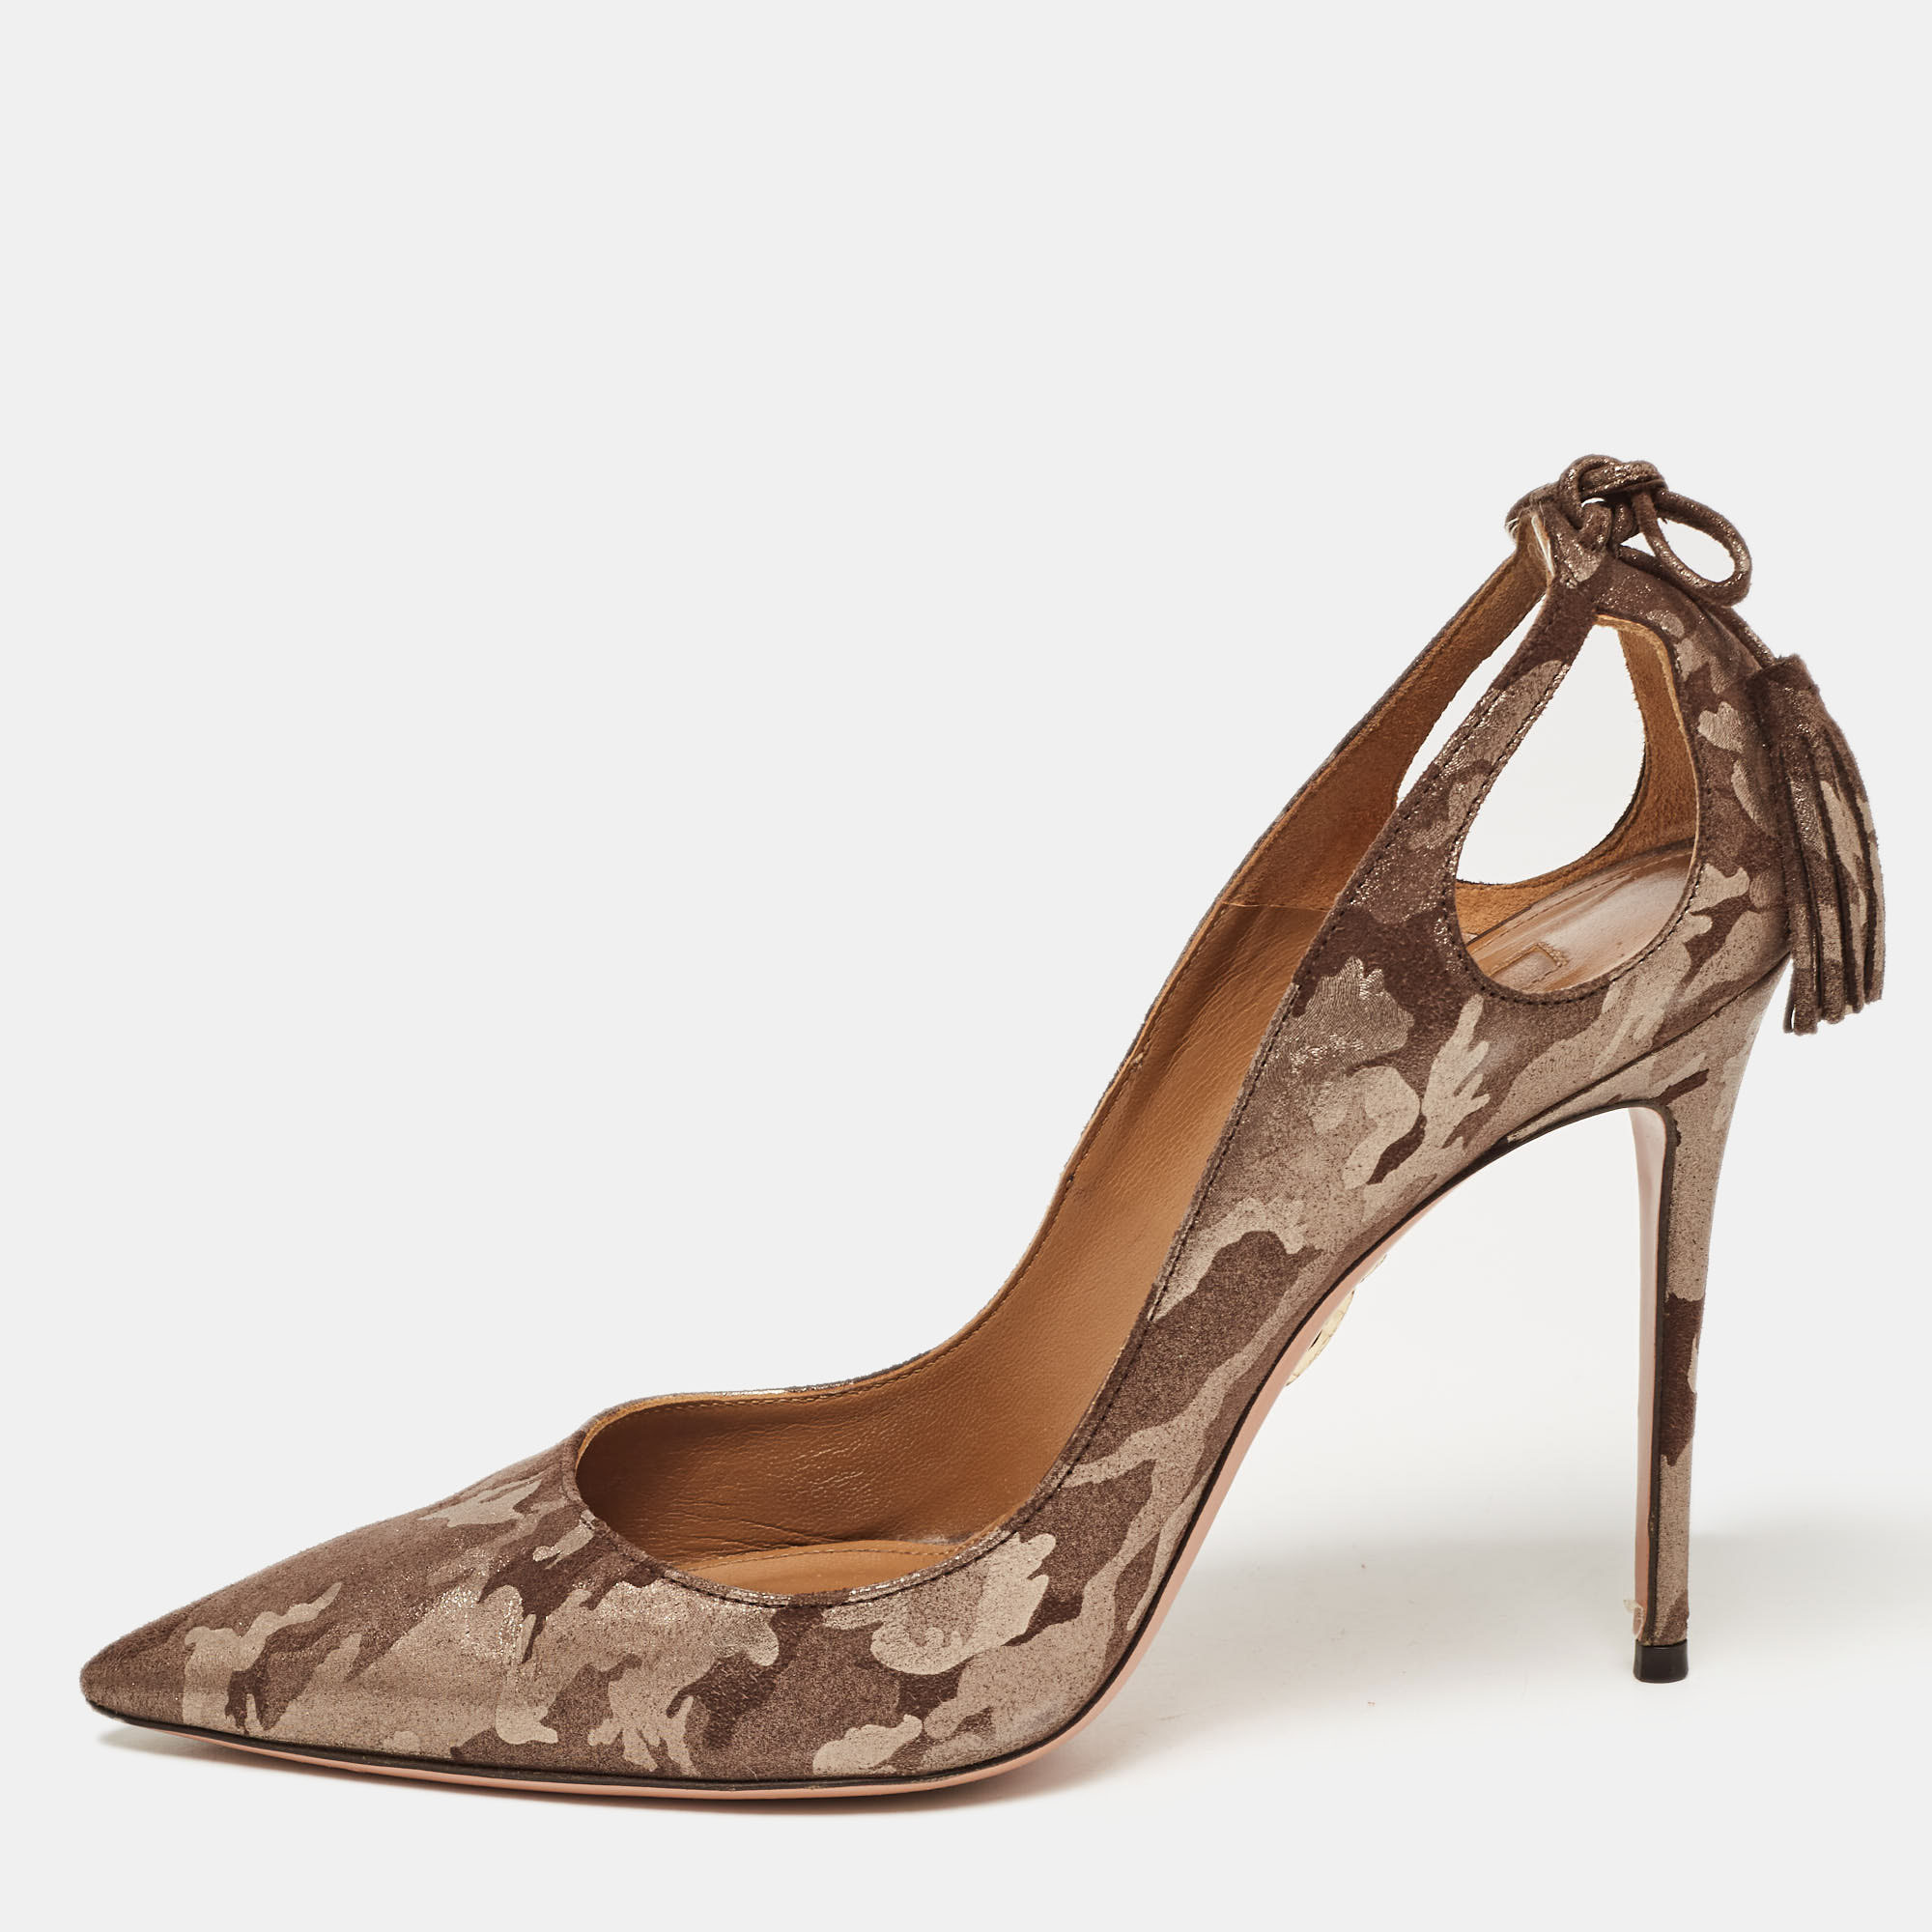 Pre-owned Aquazzura Brown Suede Animal Print Pumps Size 39.5